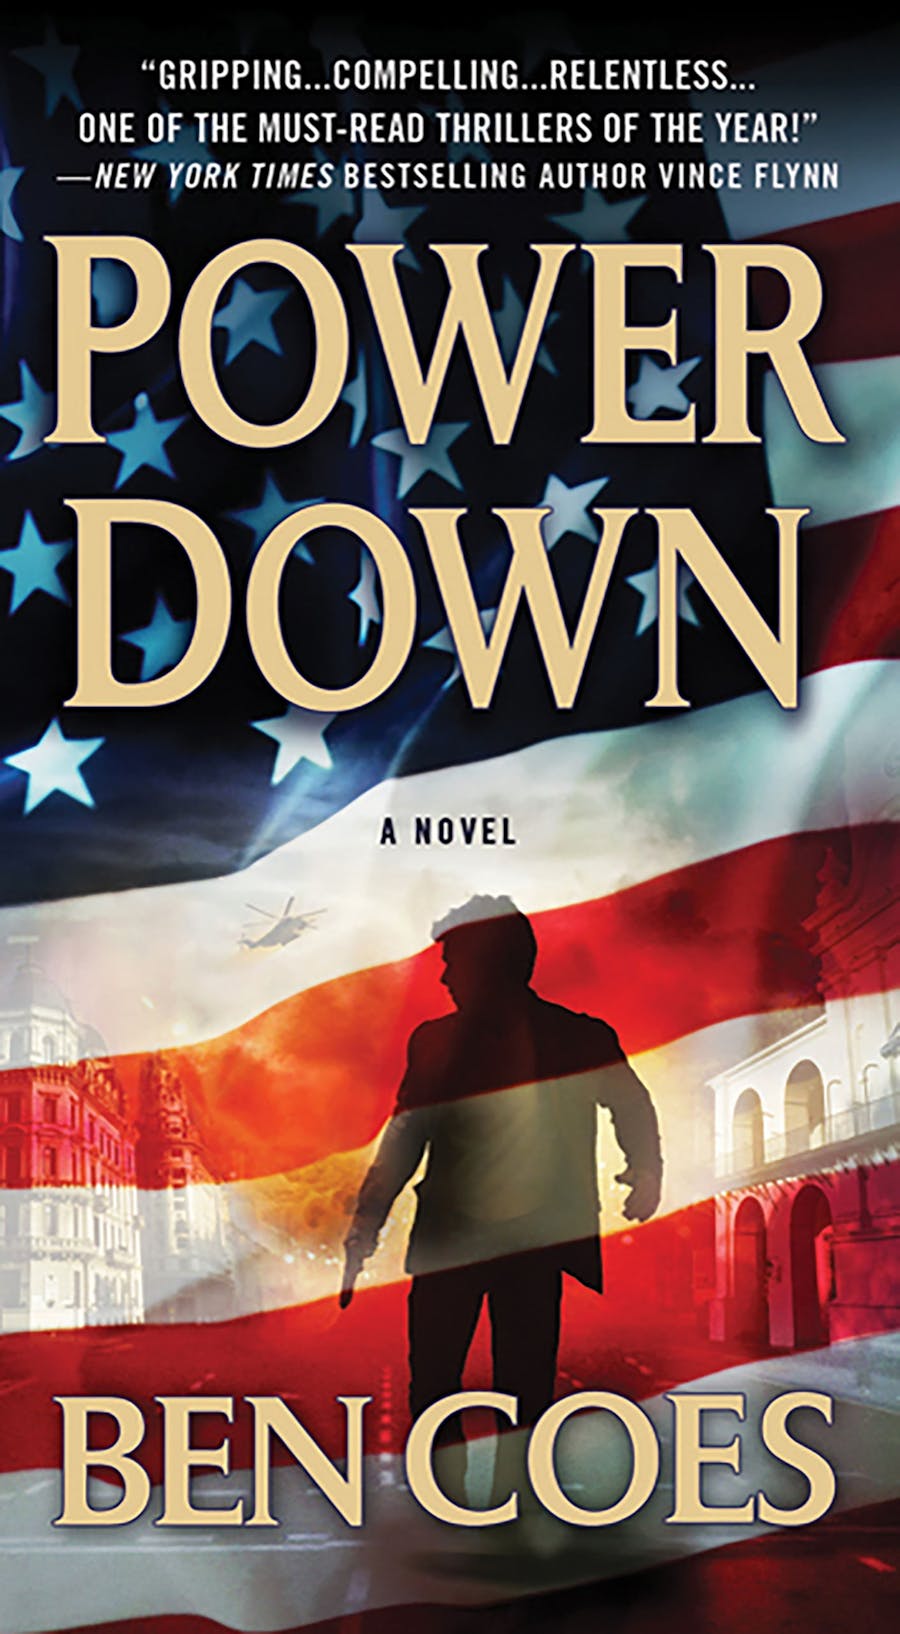 Power Down by Ben Coes